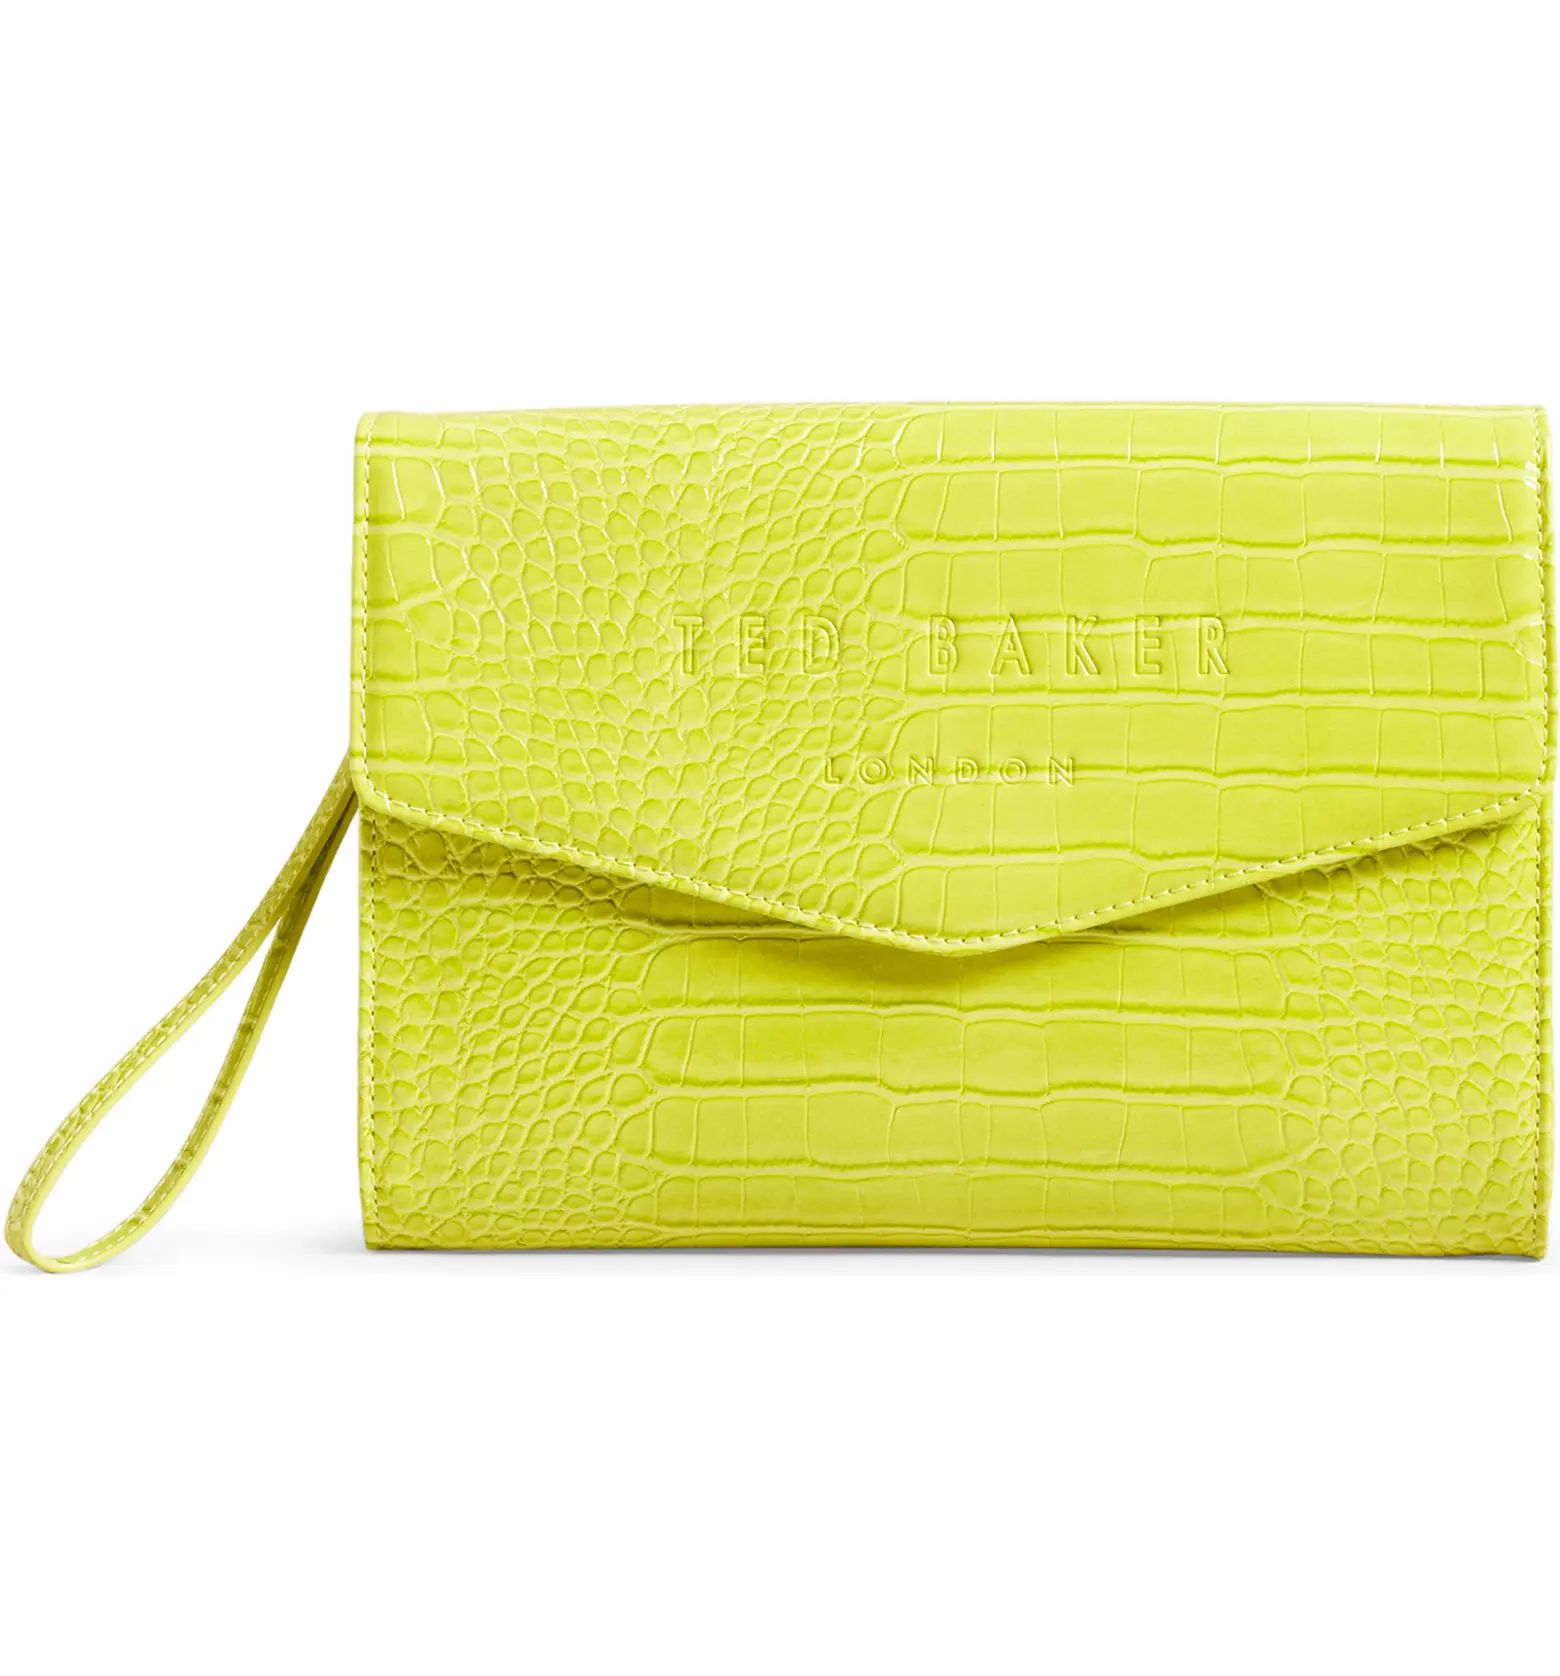 Crocey Croc Embossed Faux Leather Clutch | Nordstrom